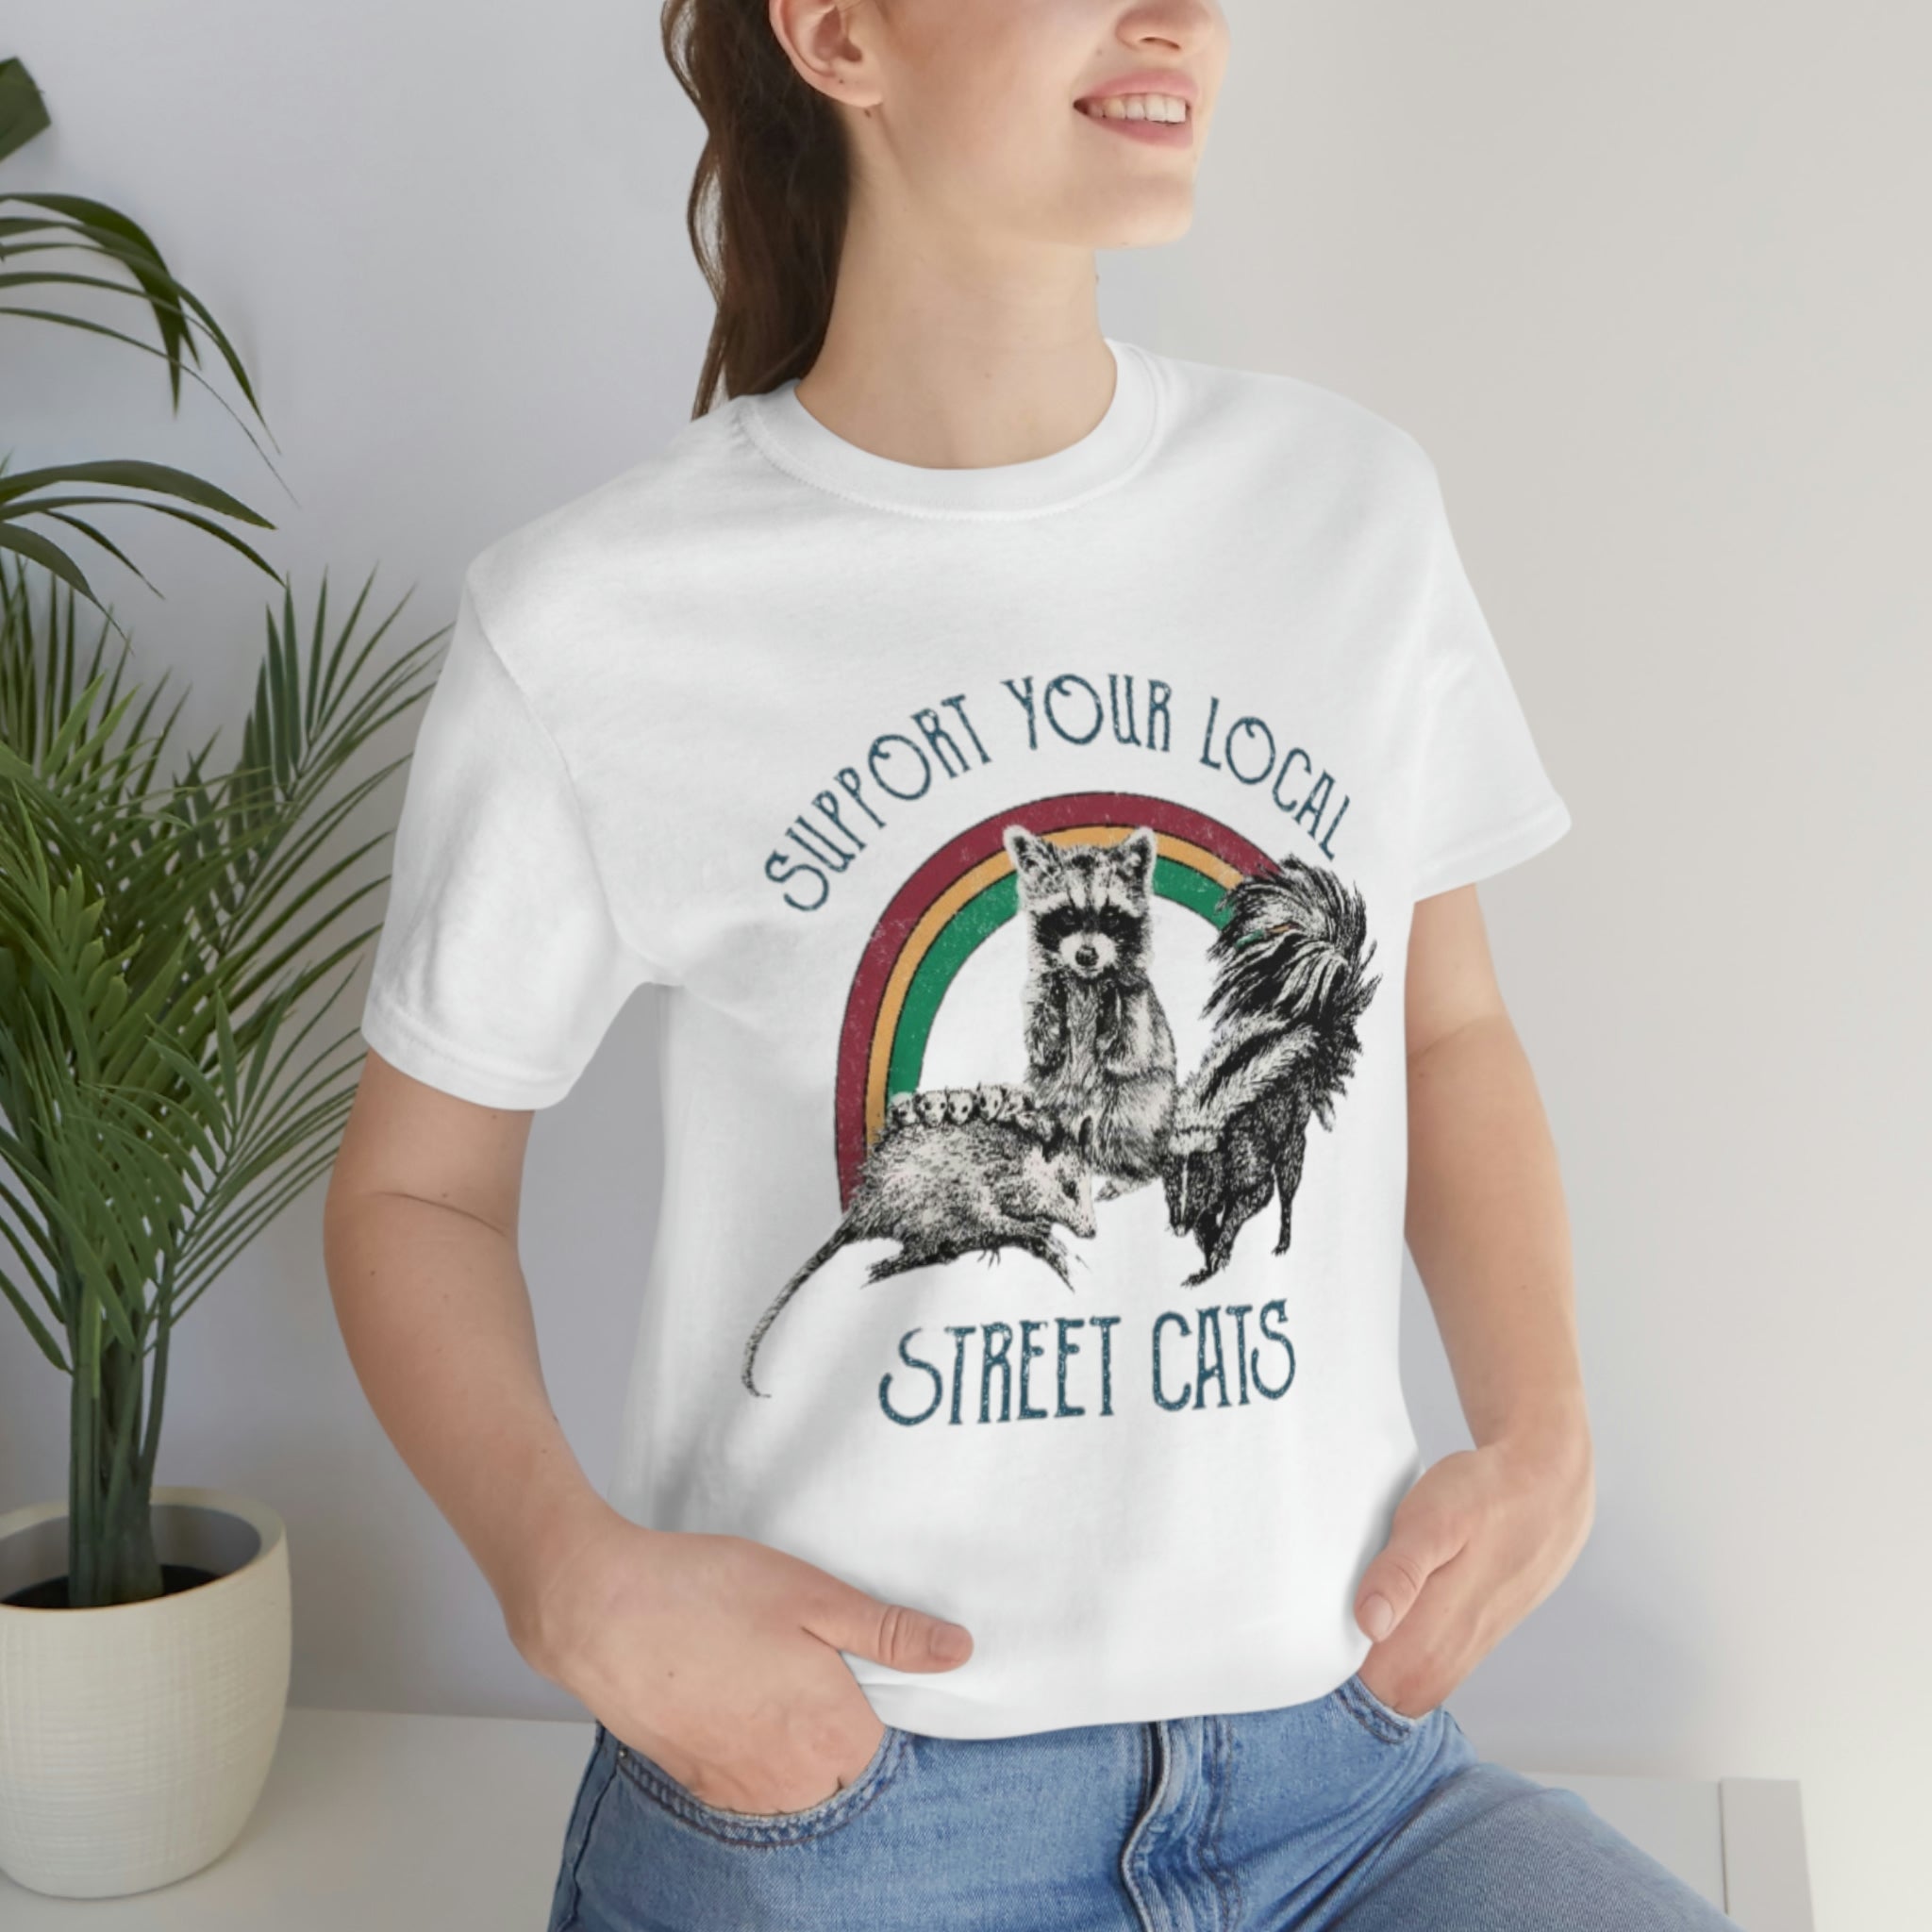 Support Your Local Street Cats - Funny Gift For Raccoon Lovers -- Short-Sleeve Unisex T-Shirt